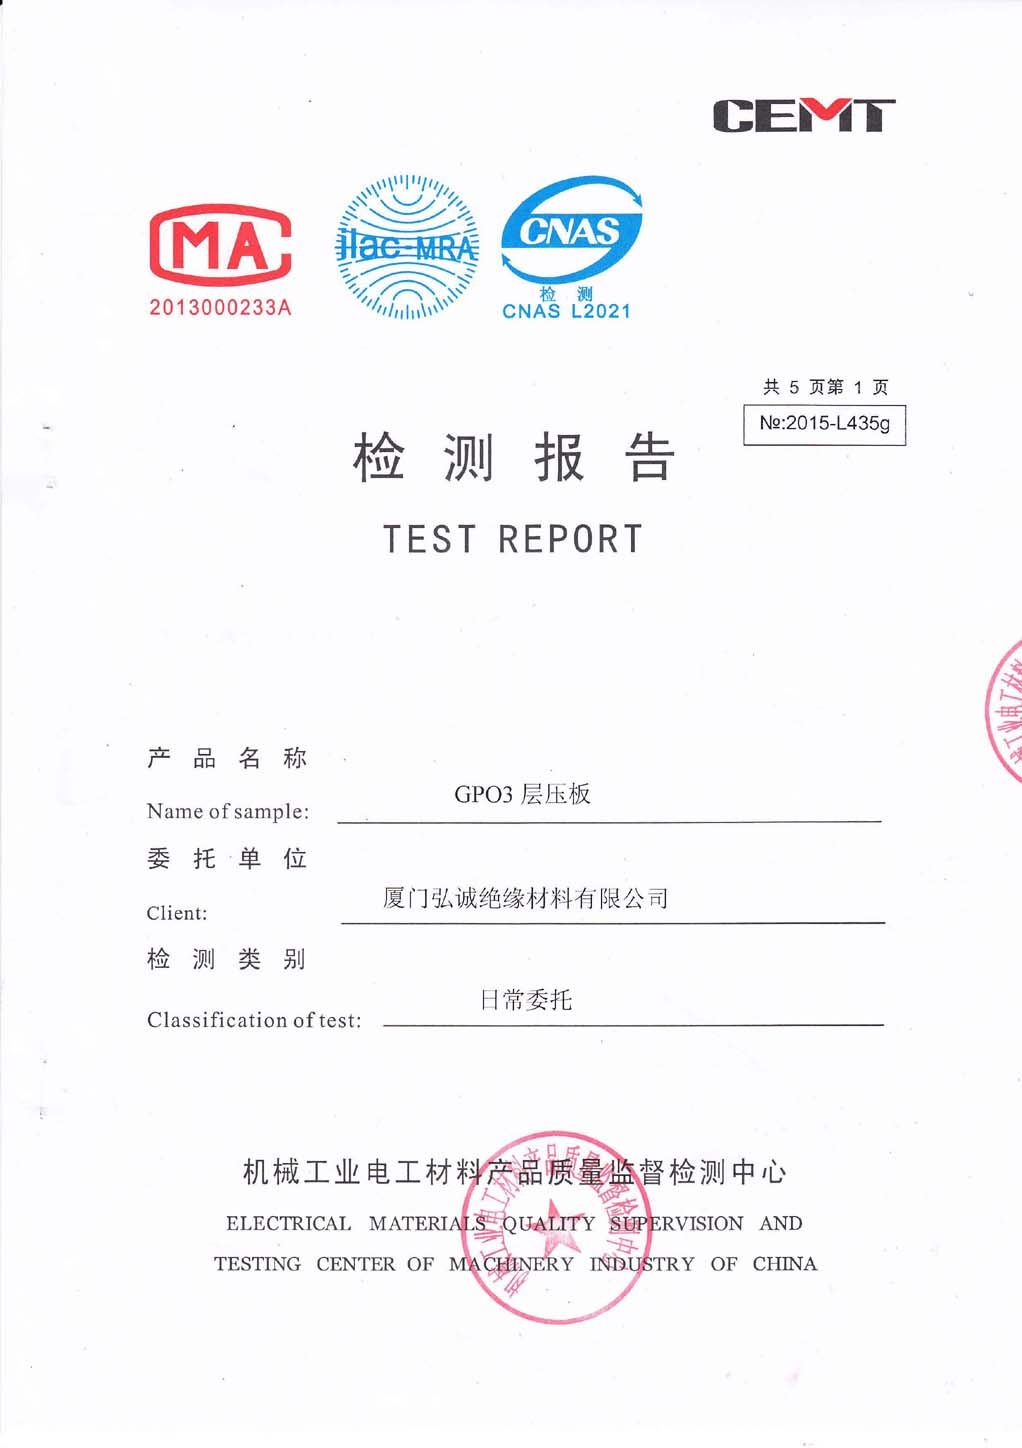 Third party test report